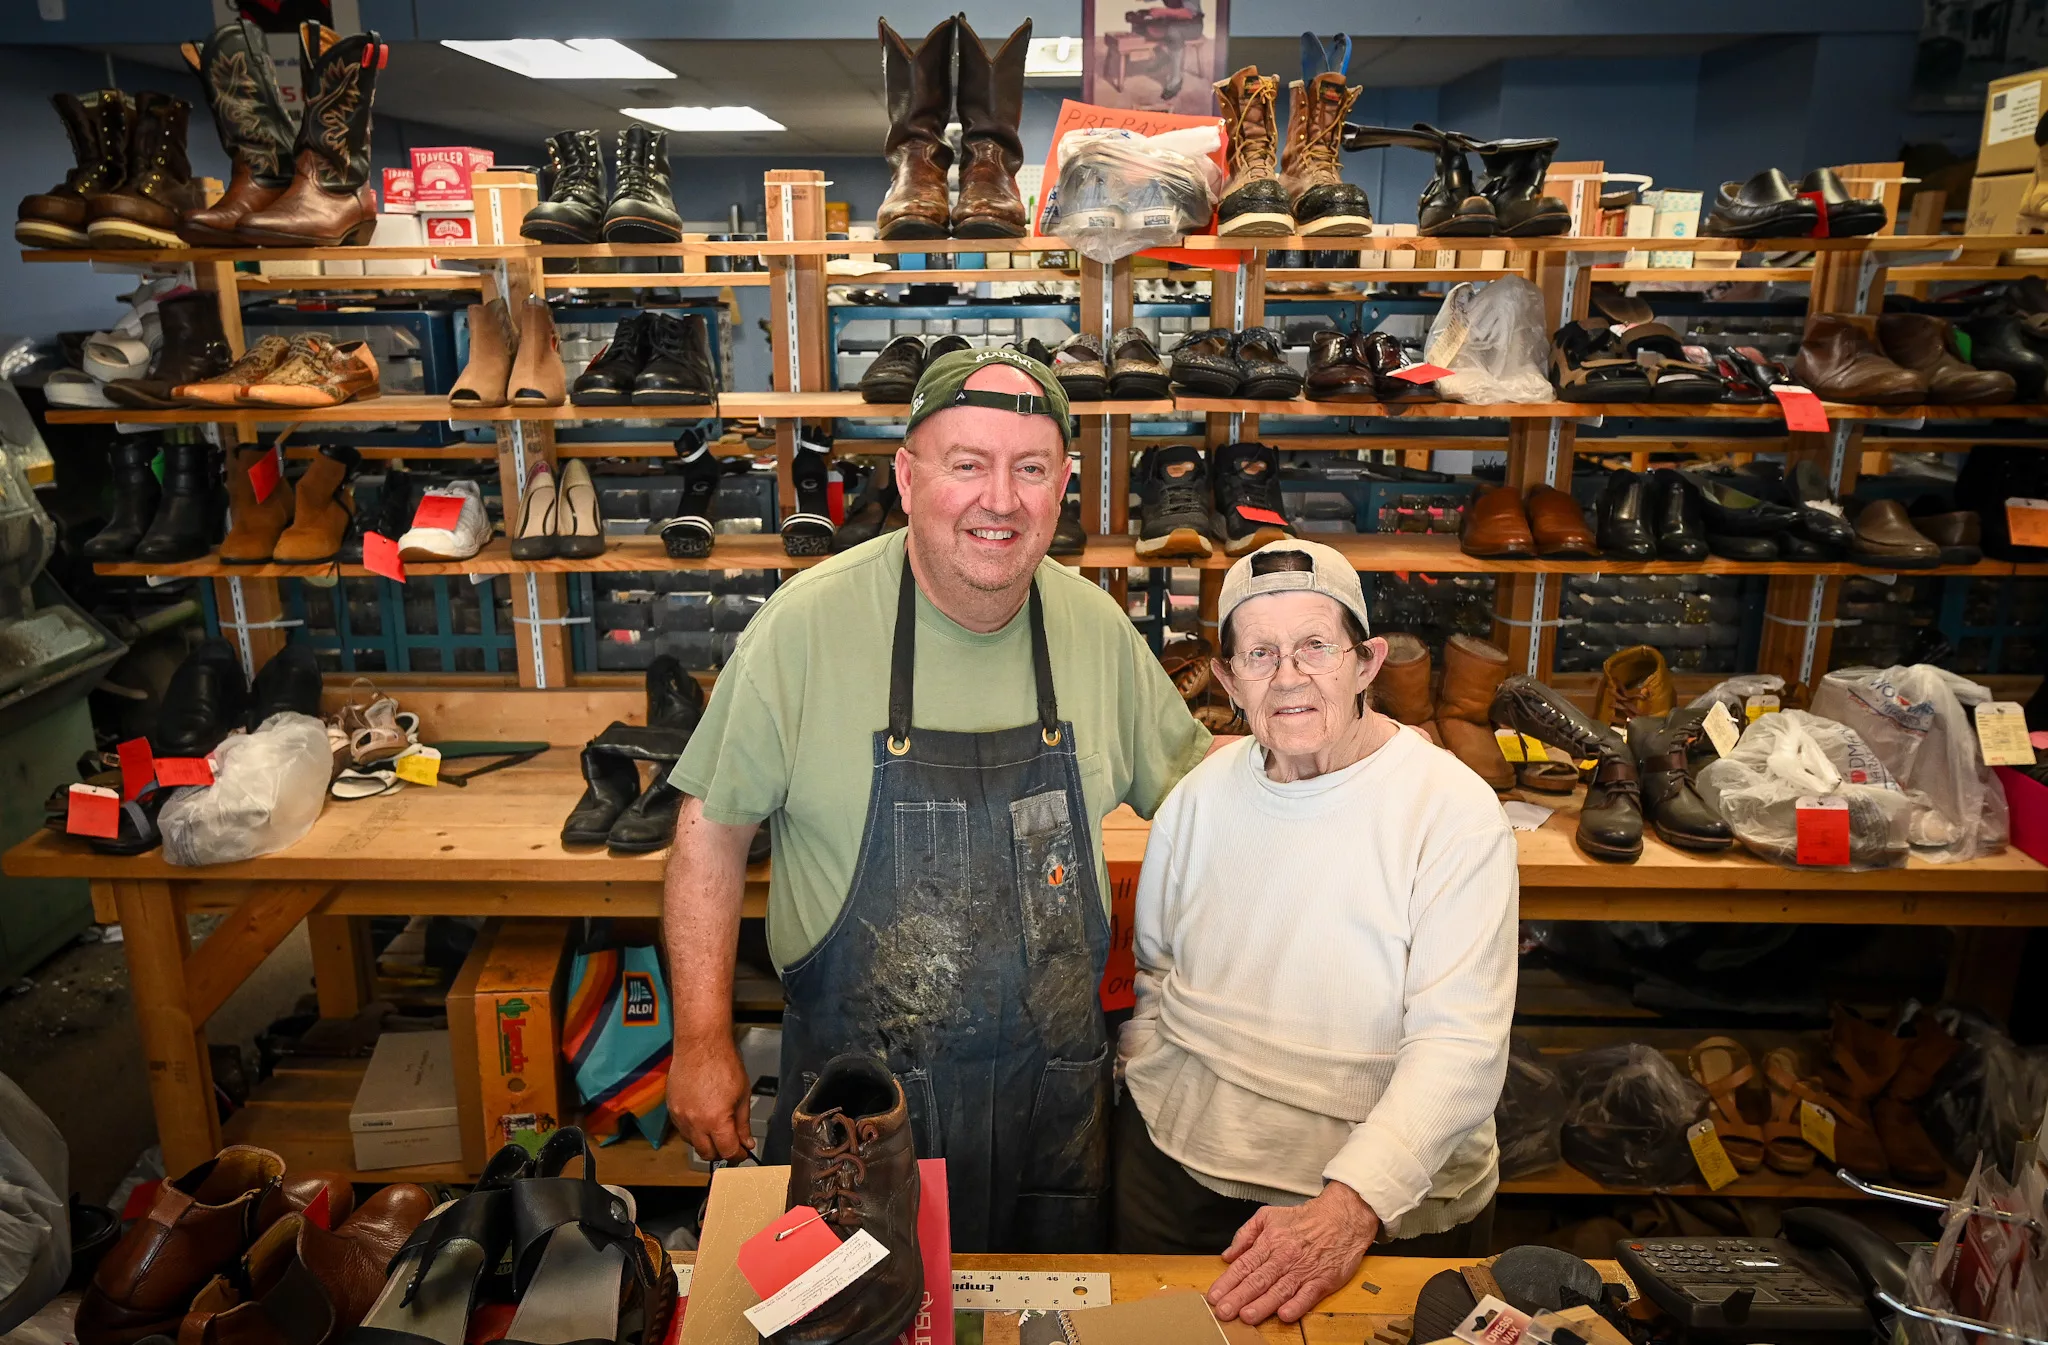 Forced to move as part of Rockford flood relief, Charles Street Shoe Repair  finds new home in Loves Park